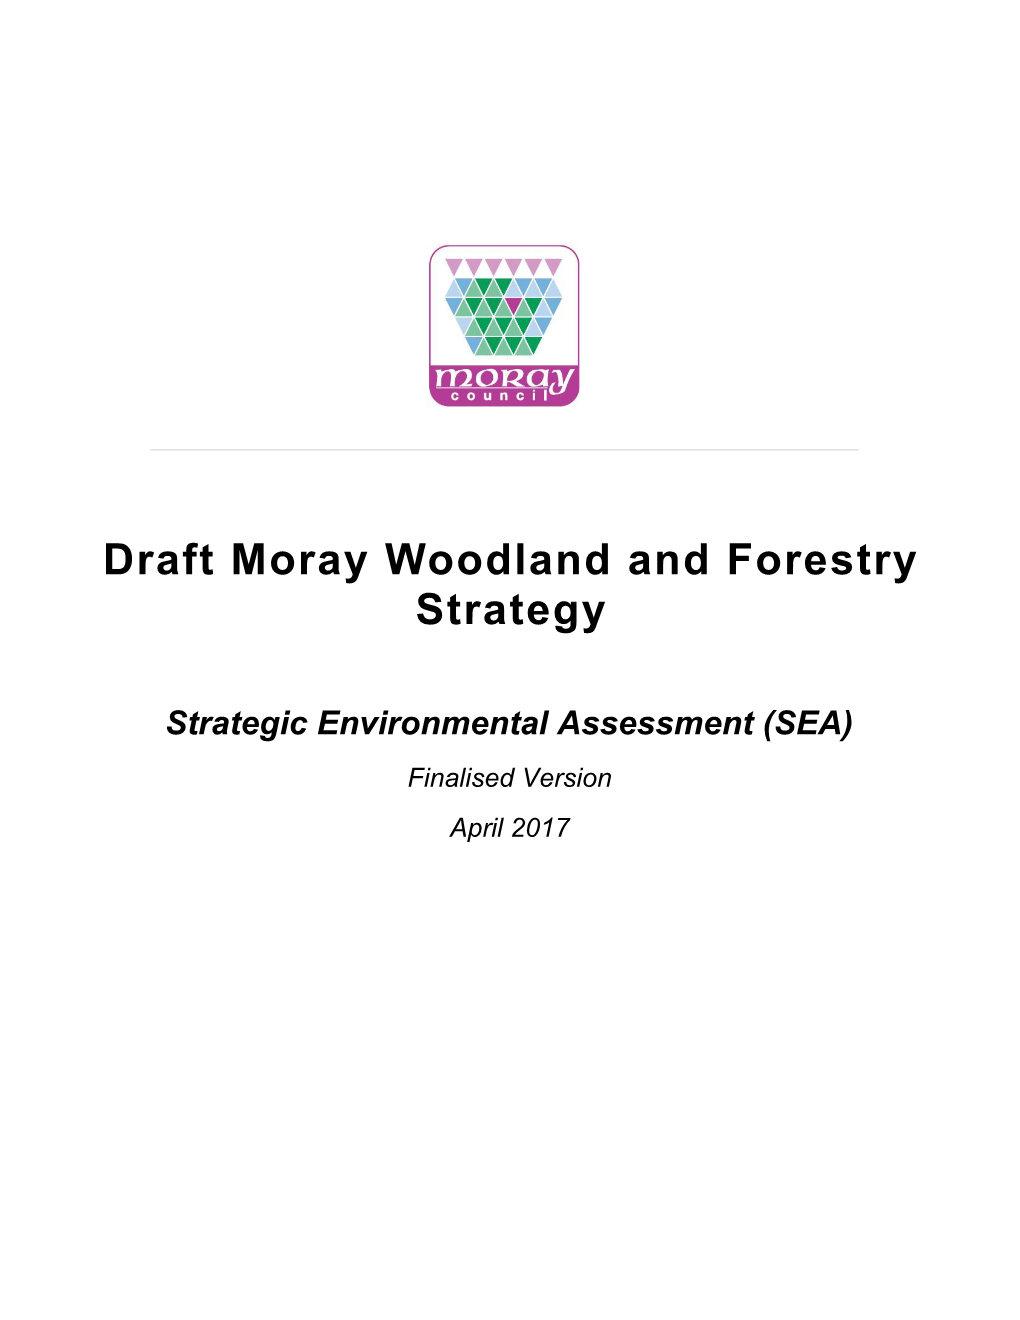 Draft Moray Woodland and Forestry Strategy 25